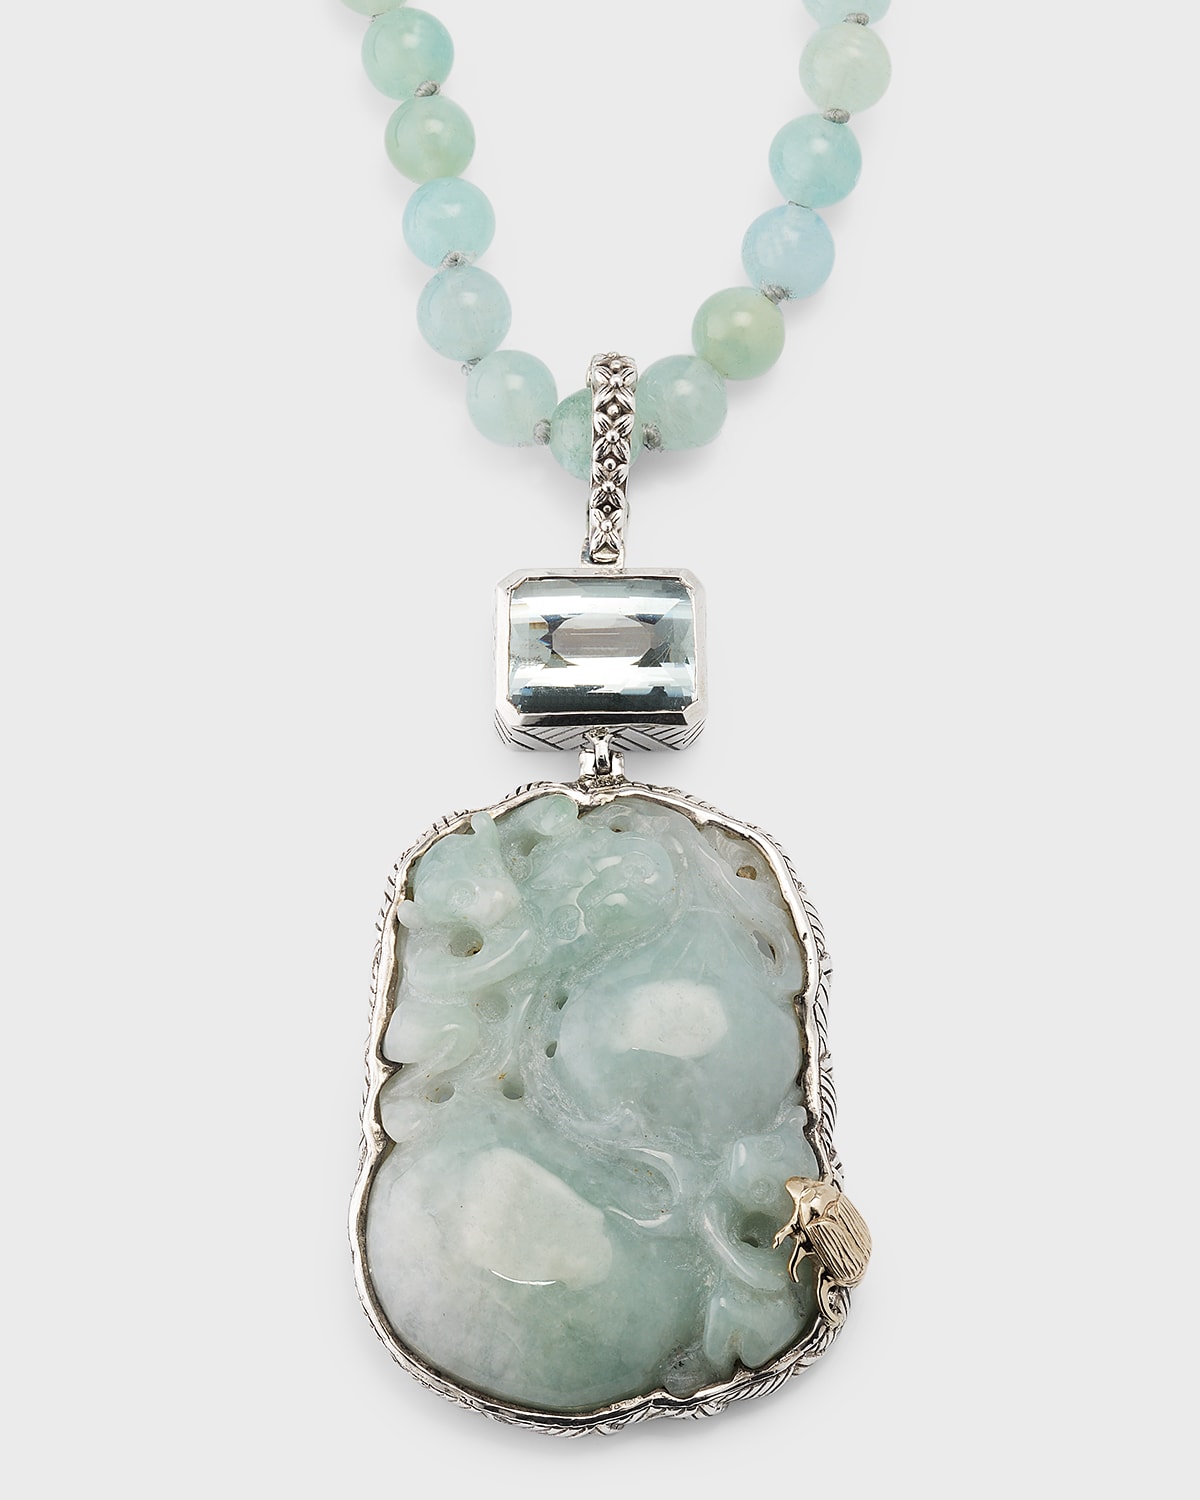 Vintage Hand-Carved Jade and Aquamarine Beaded Necklace